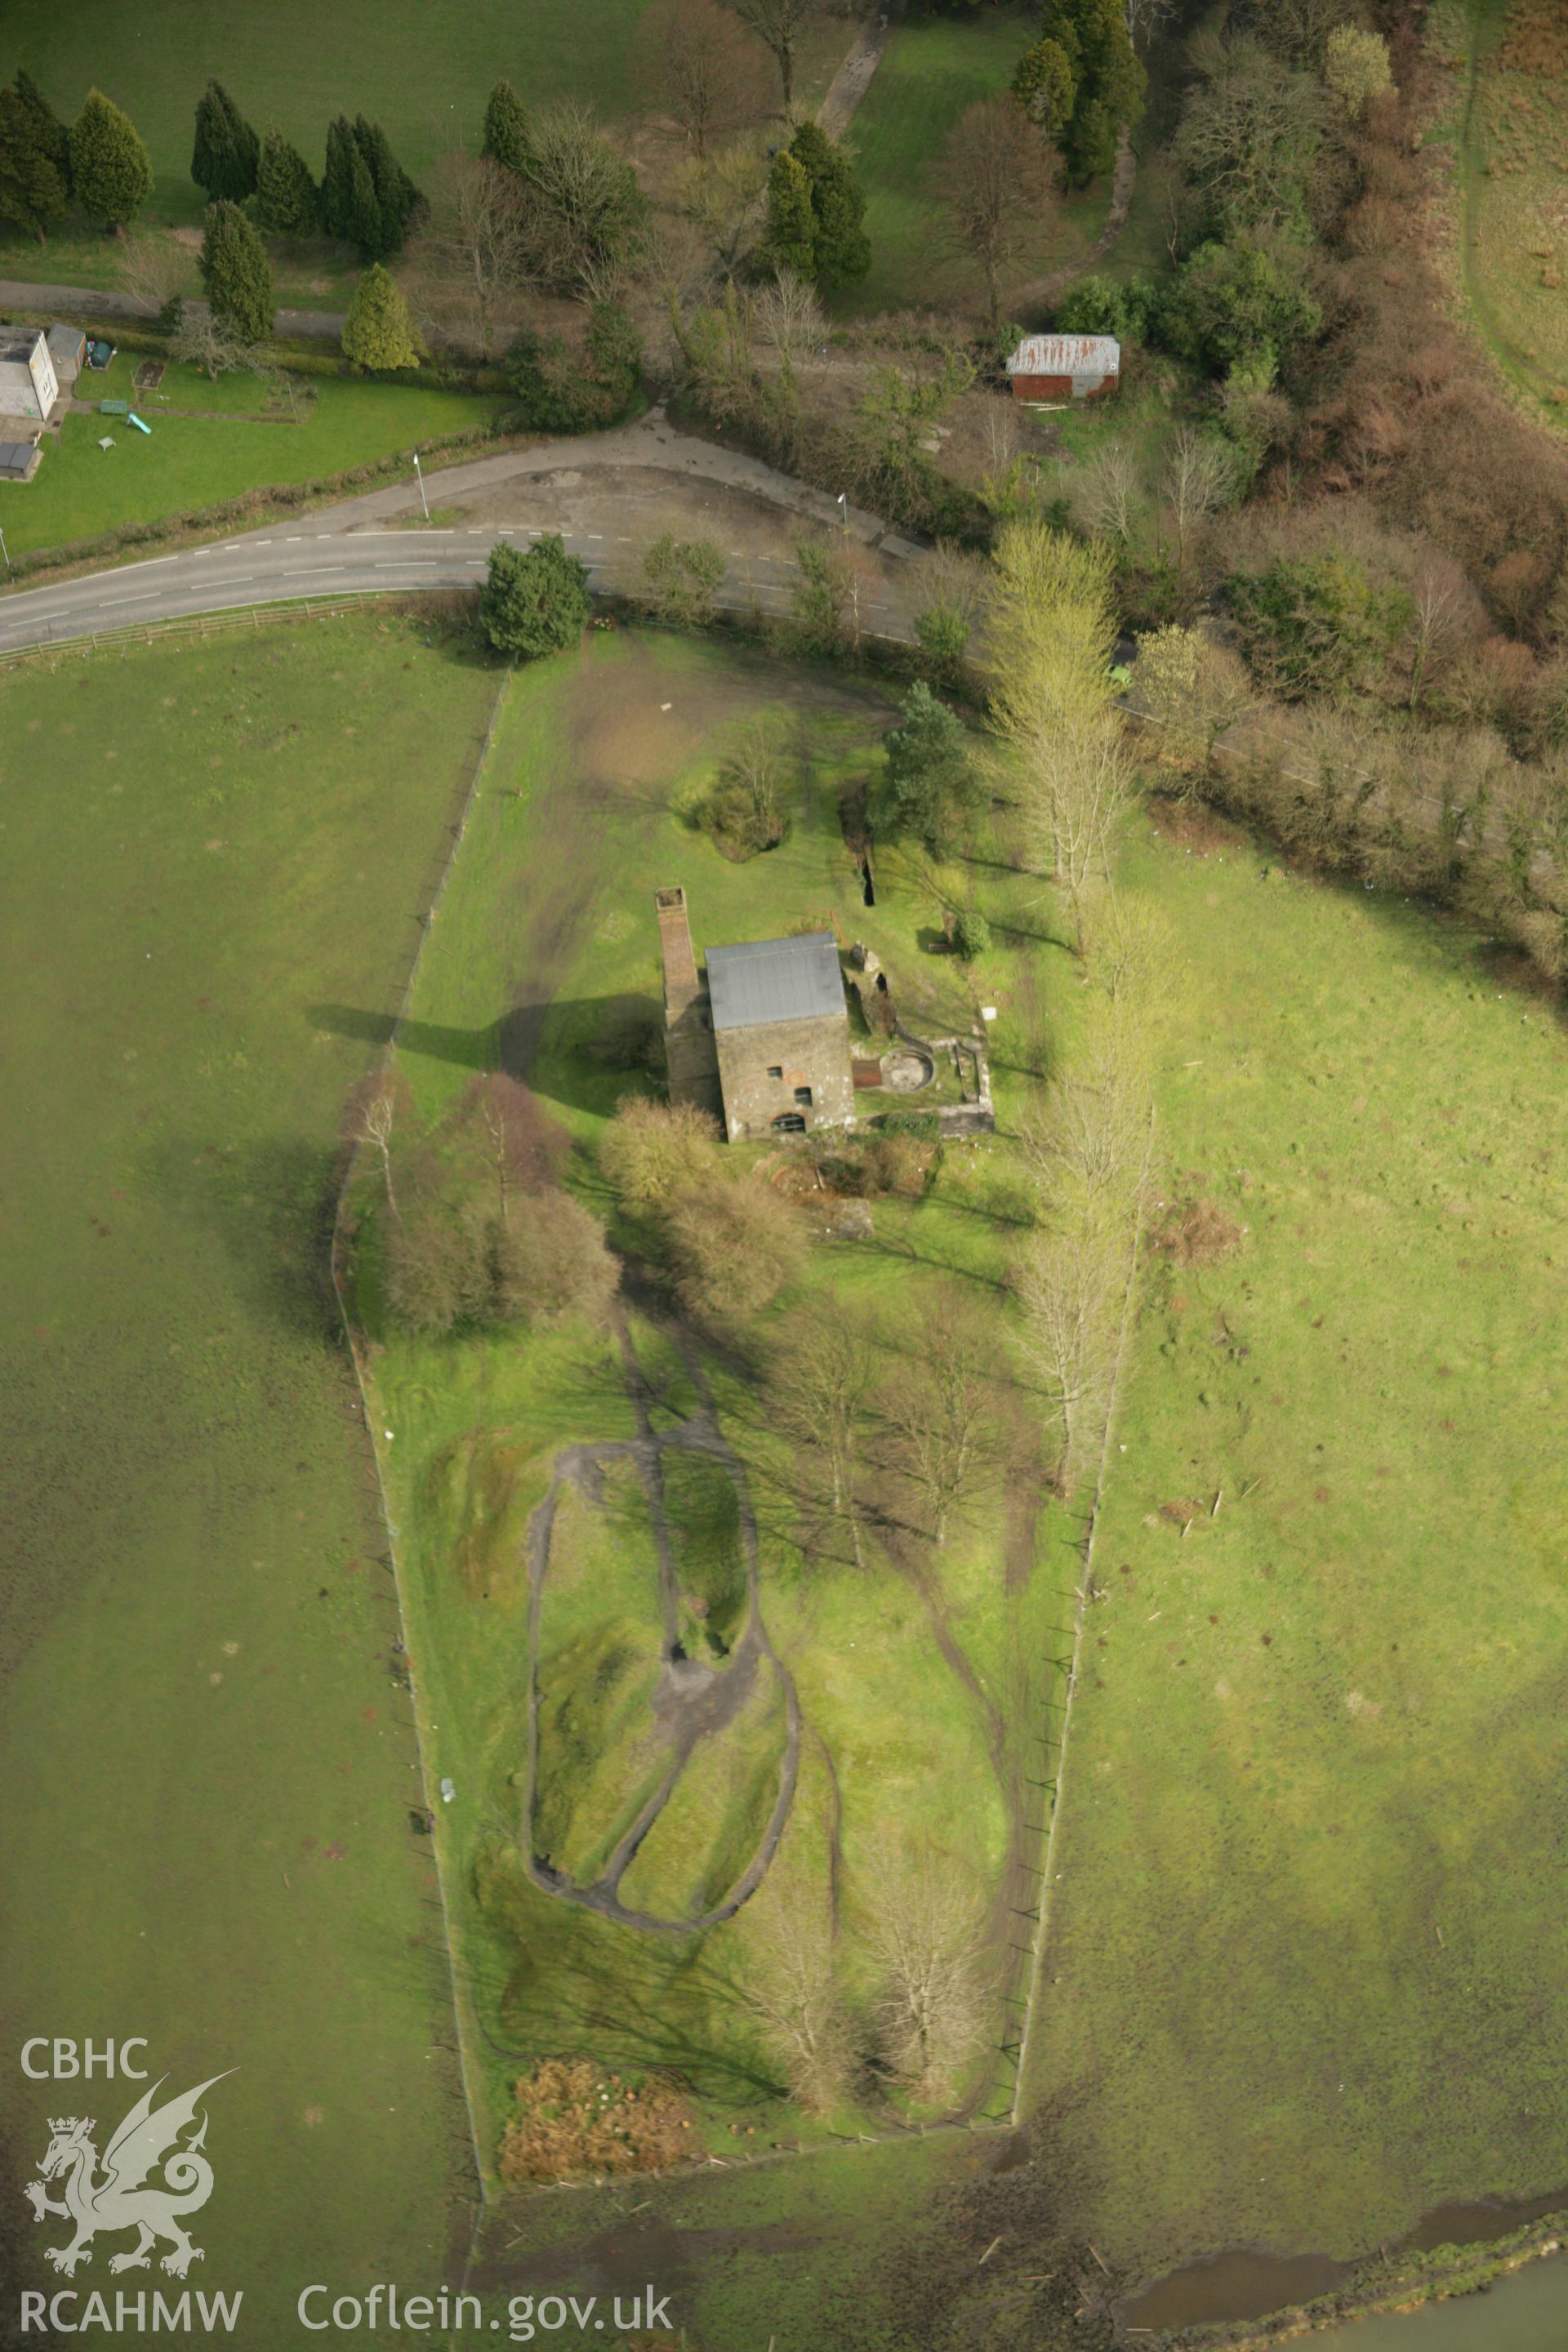 RCAHMW colour oblique aerial photograph of Scotts Pit Engine House, Heol-Las. Taken on 16 March 2007 by Toby Driver